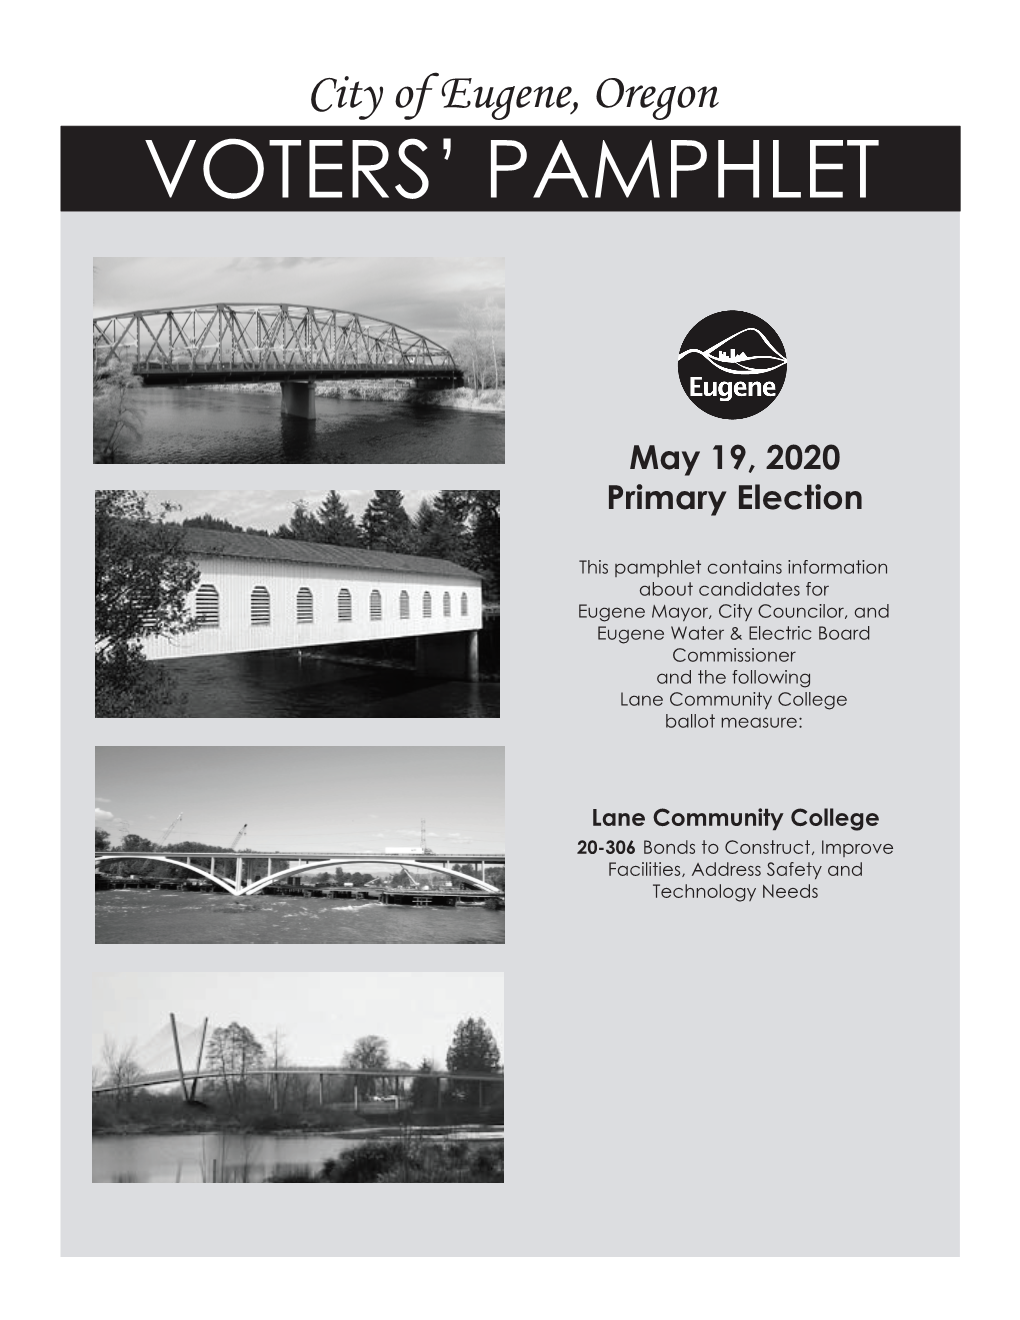 May 19, 2020, Primary Election Voters' Pamphlet